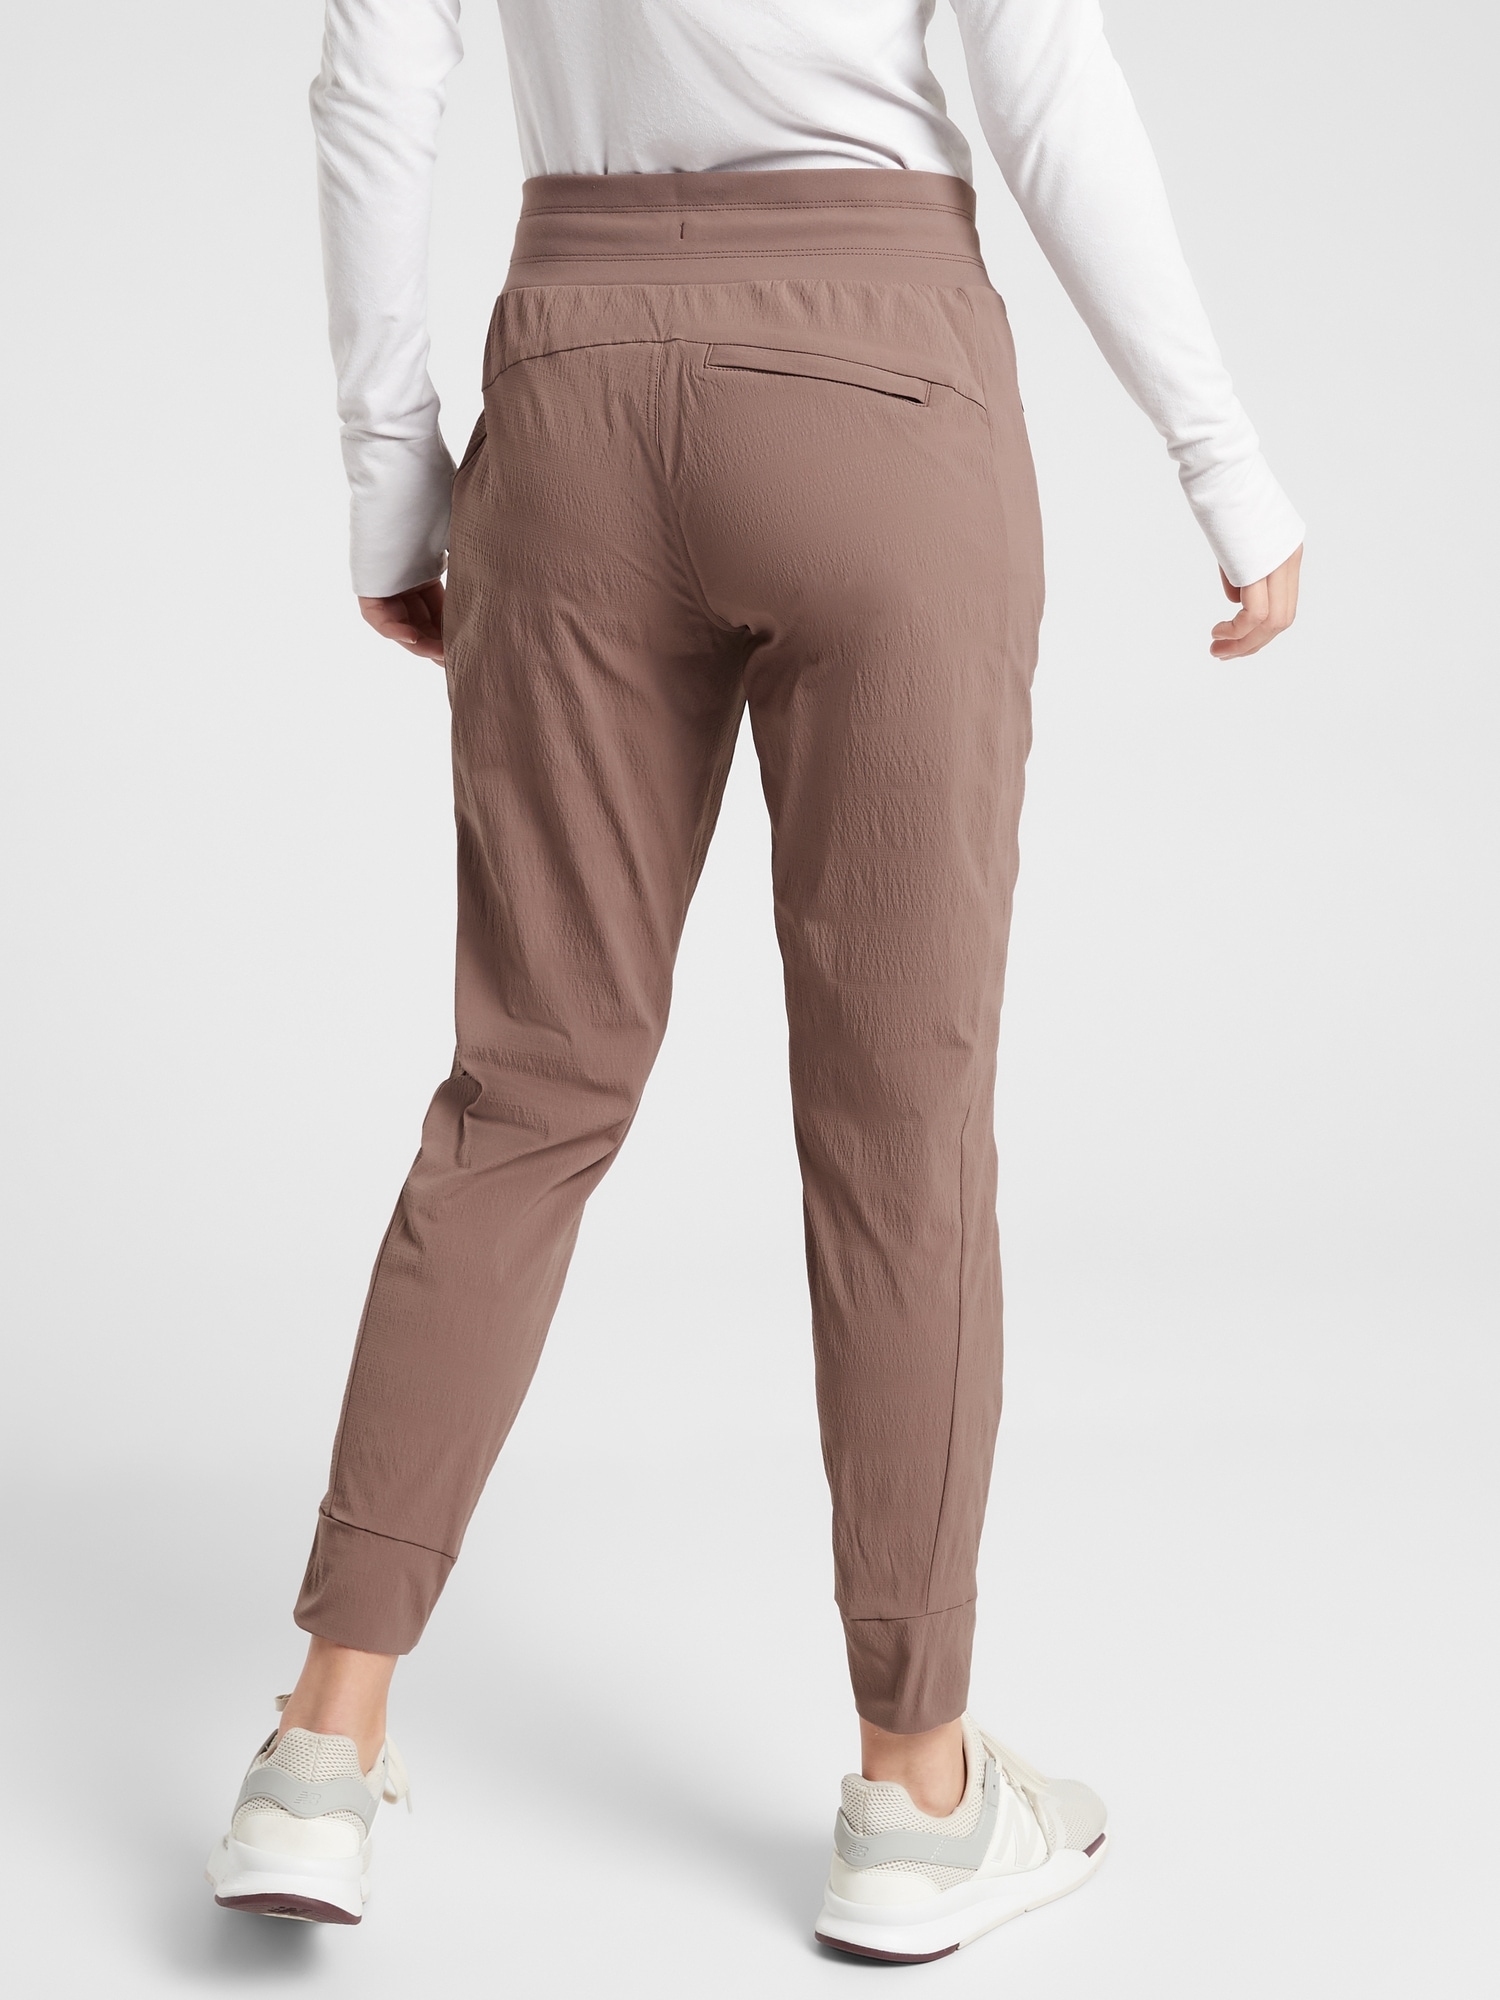 Athleta, Pants & Jumpsuits, Athleta Trekkie North Jogger Super  Comfortable And Easy To Wear